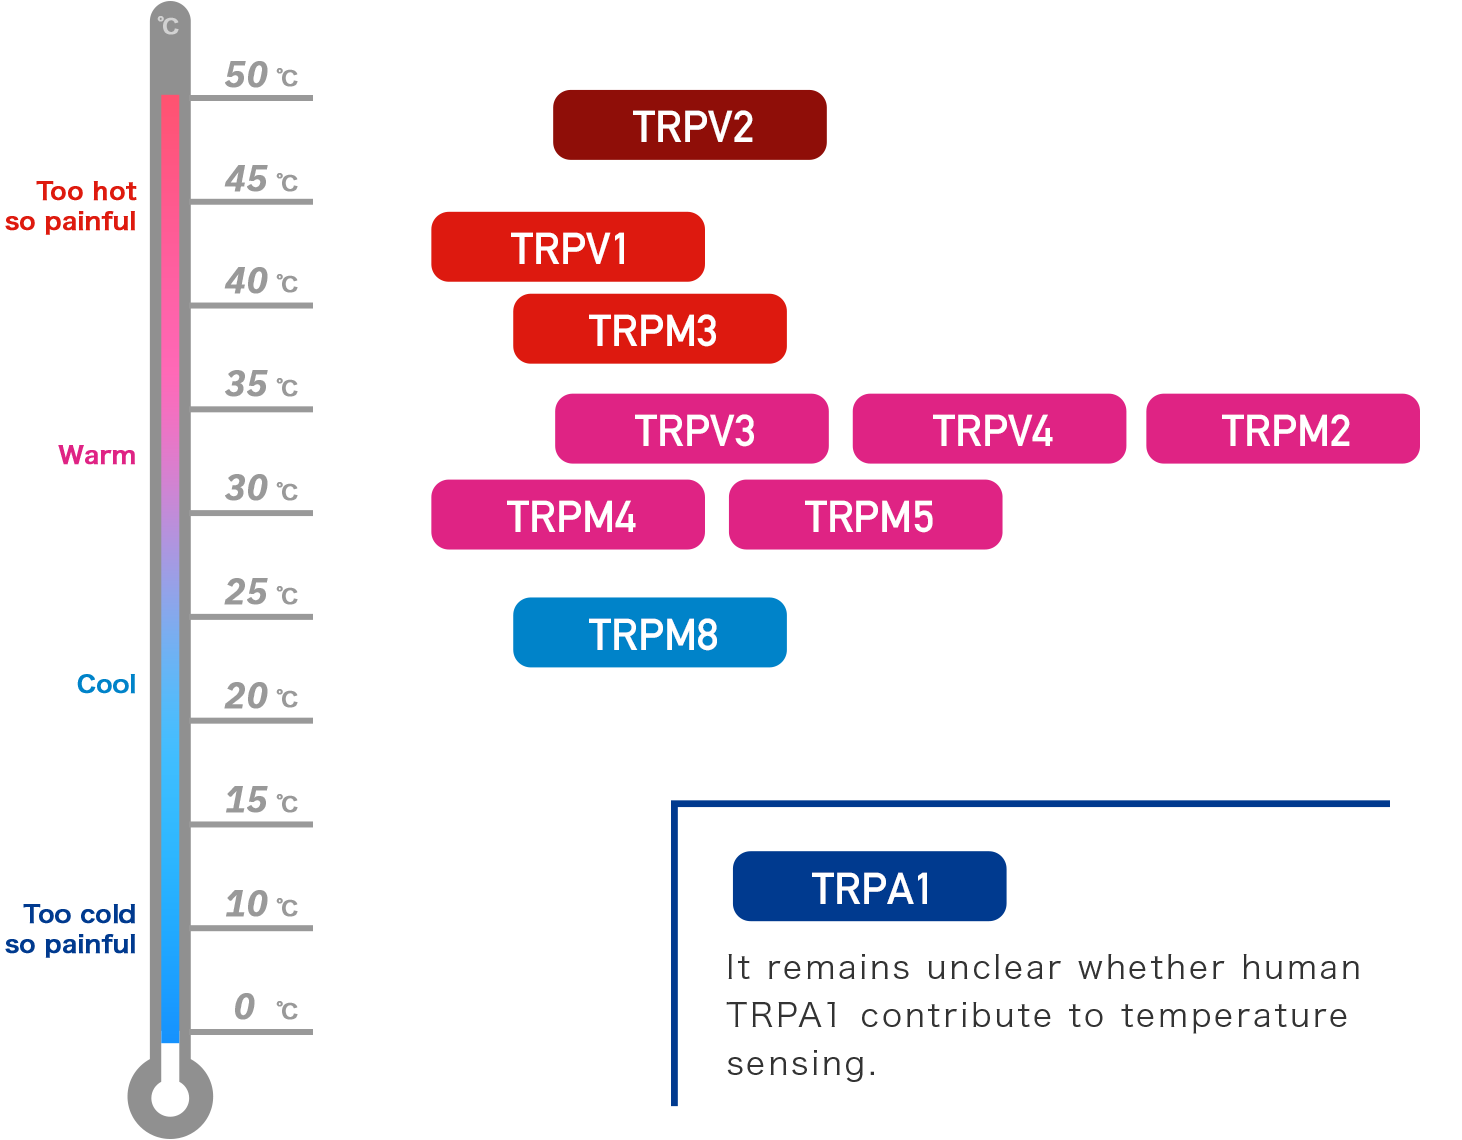 About TRP channels